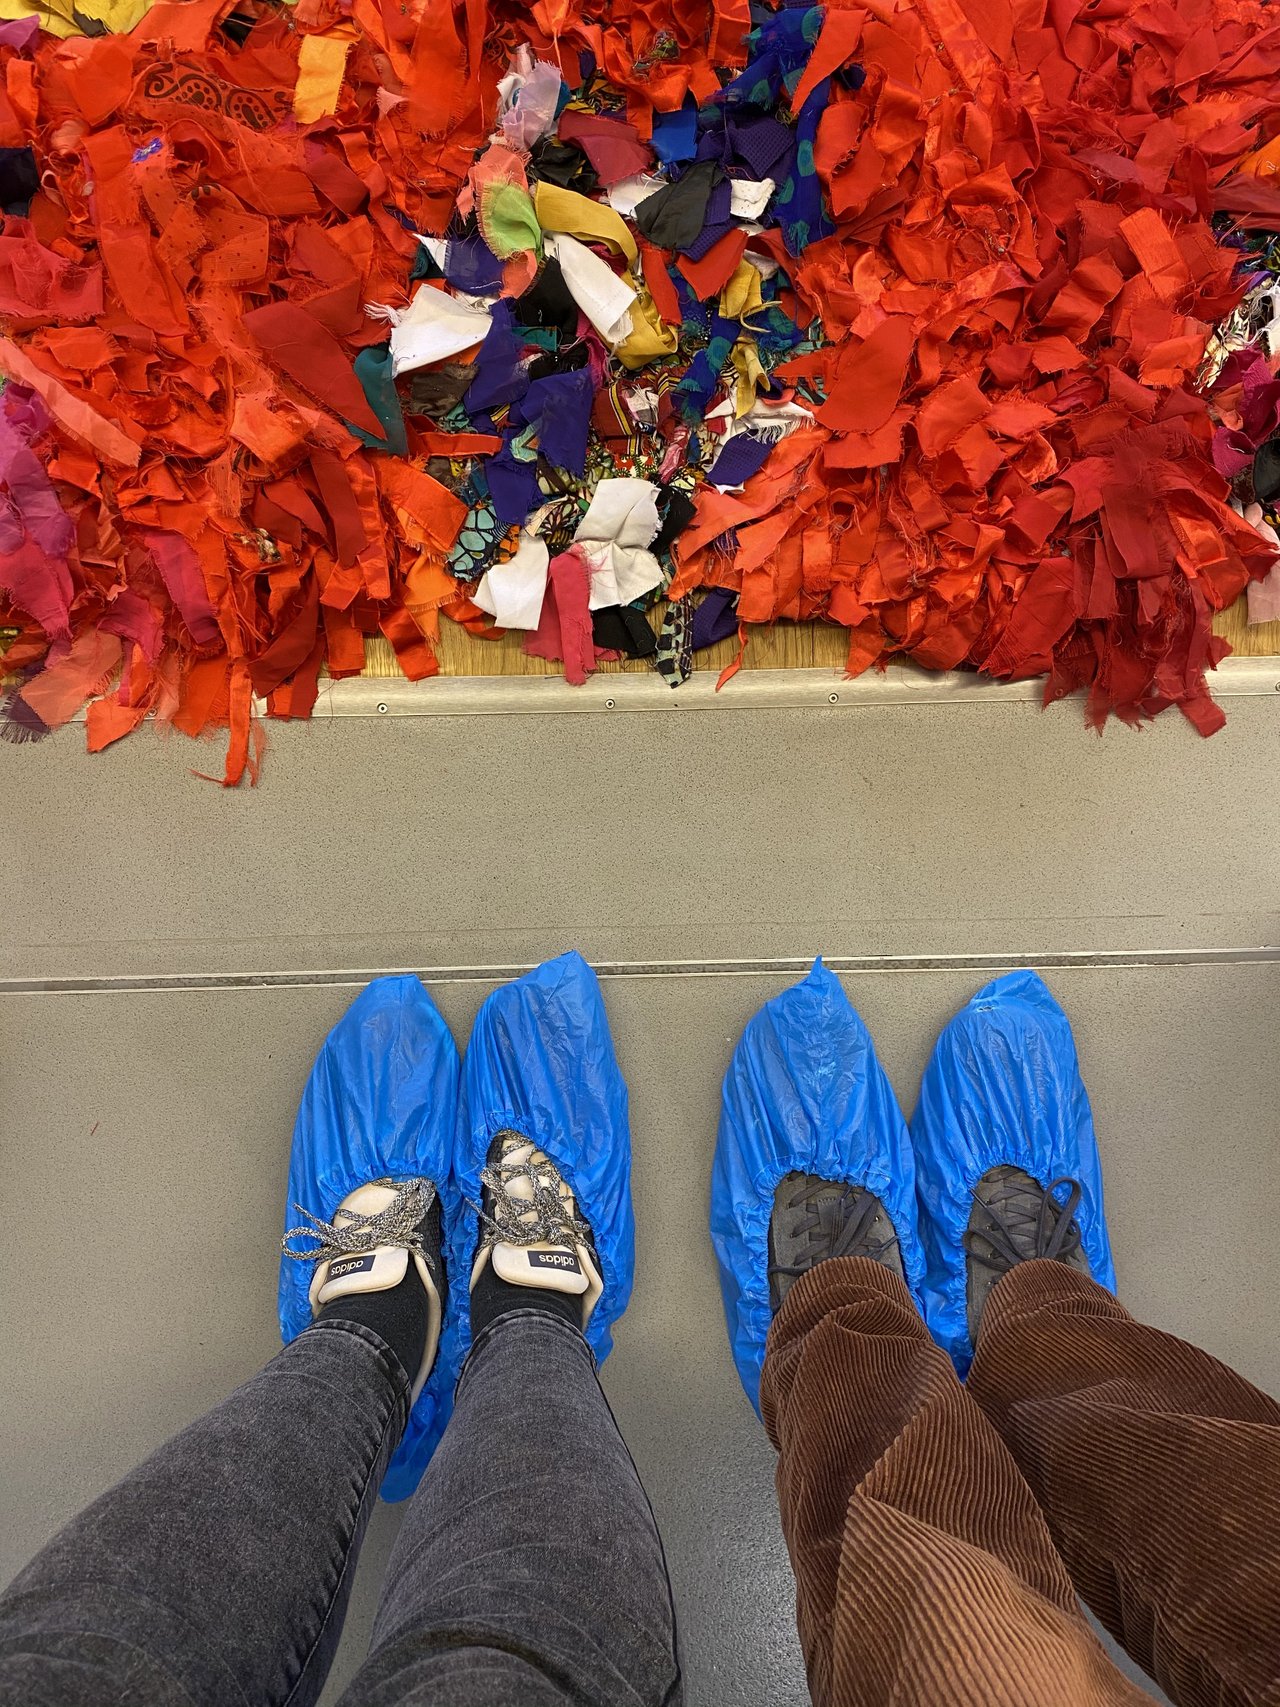 our feet clad in protective covers in front of a red carpet